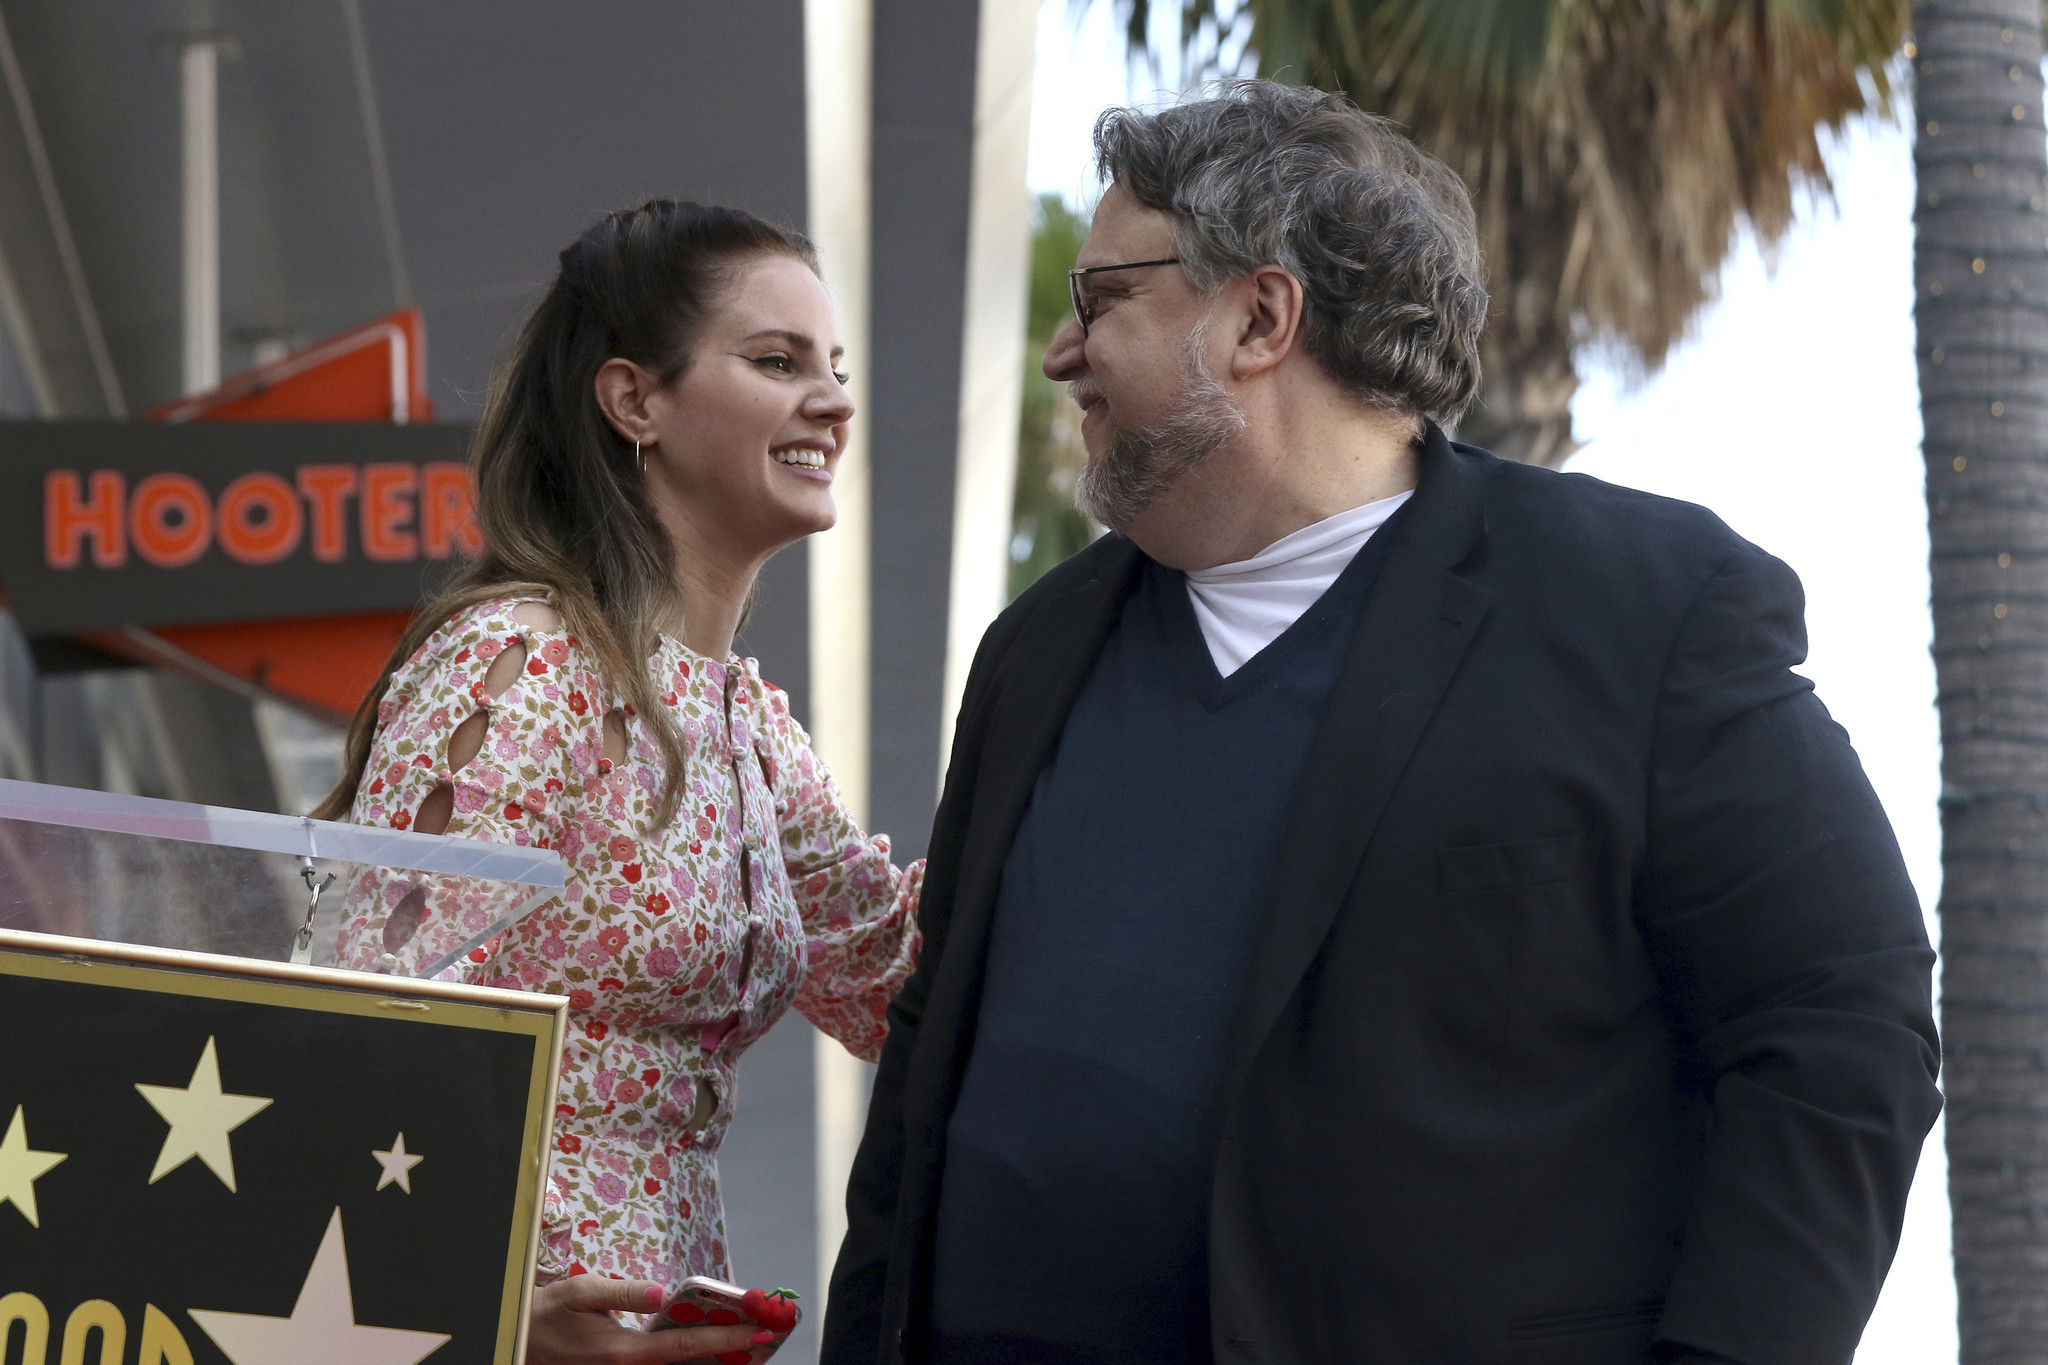 Lana Del Rey, left, and Guillermo del Toro smile at each other during a ceremony honoring the director with a star at the Hollywood Walk of Fame on Aug. 6, 2019 in Los Angeles. del Ray will be covering the 1966 song 